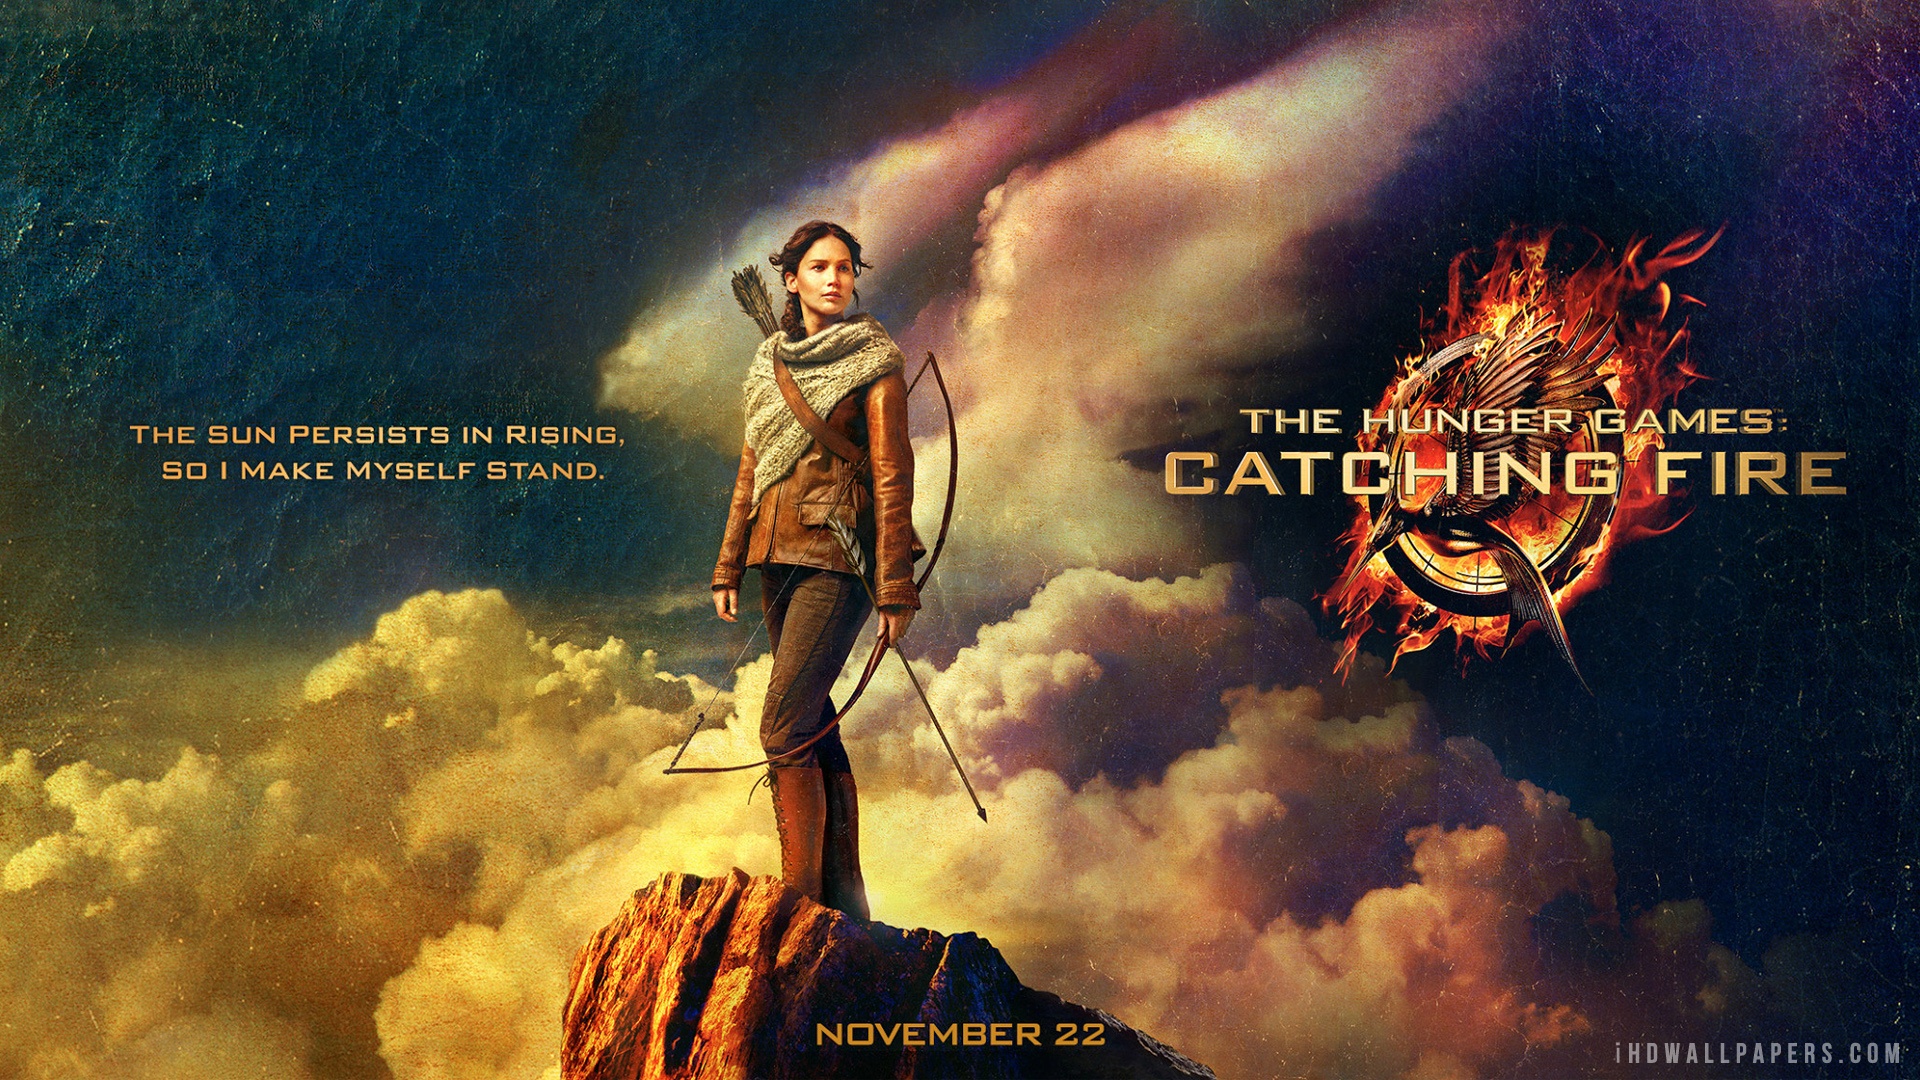 Download The Hunger Games Catching Fire 2013 wallpaper from the